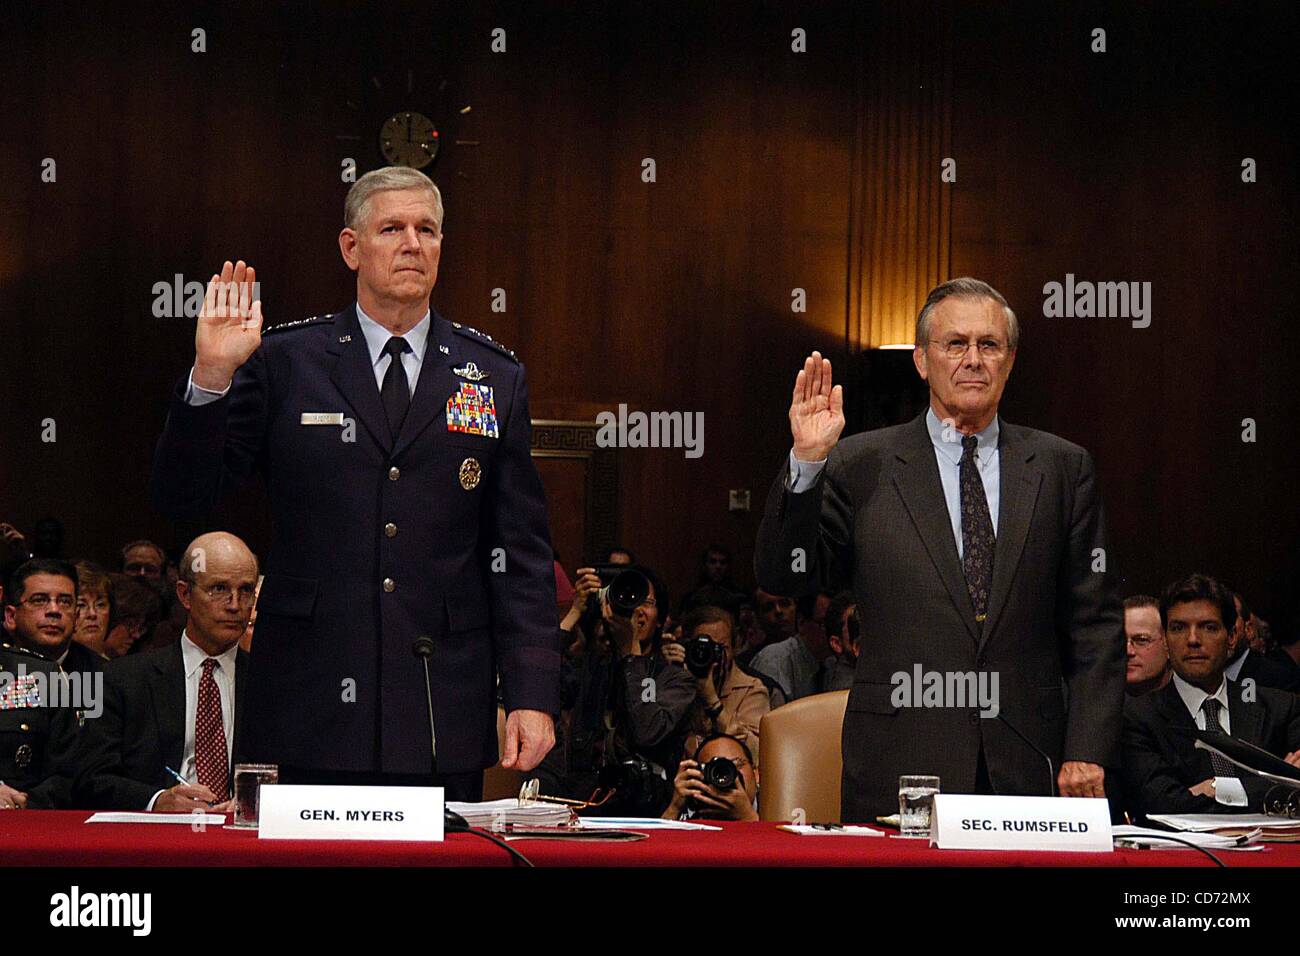 May 7, 2004 - Washington, District of Columbia, U.S. - I8729CB.SECRETARY DONALD RUMSFELD AND GENERAL RICHARD B MEYERS TESTIFING BEFORE THE SENATE ARMED SERVICES COMMITTEE TO AFFIRM THAT THE PHOTOGRAPHS OF ABUSE IN ABU GHRAIB PRISON OFFENDED AND OUTRAGED EVERYONE IN THE DEFENSE DEPARTMENT, WASHINGTON Stock Photo